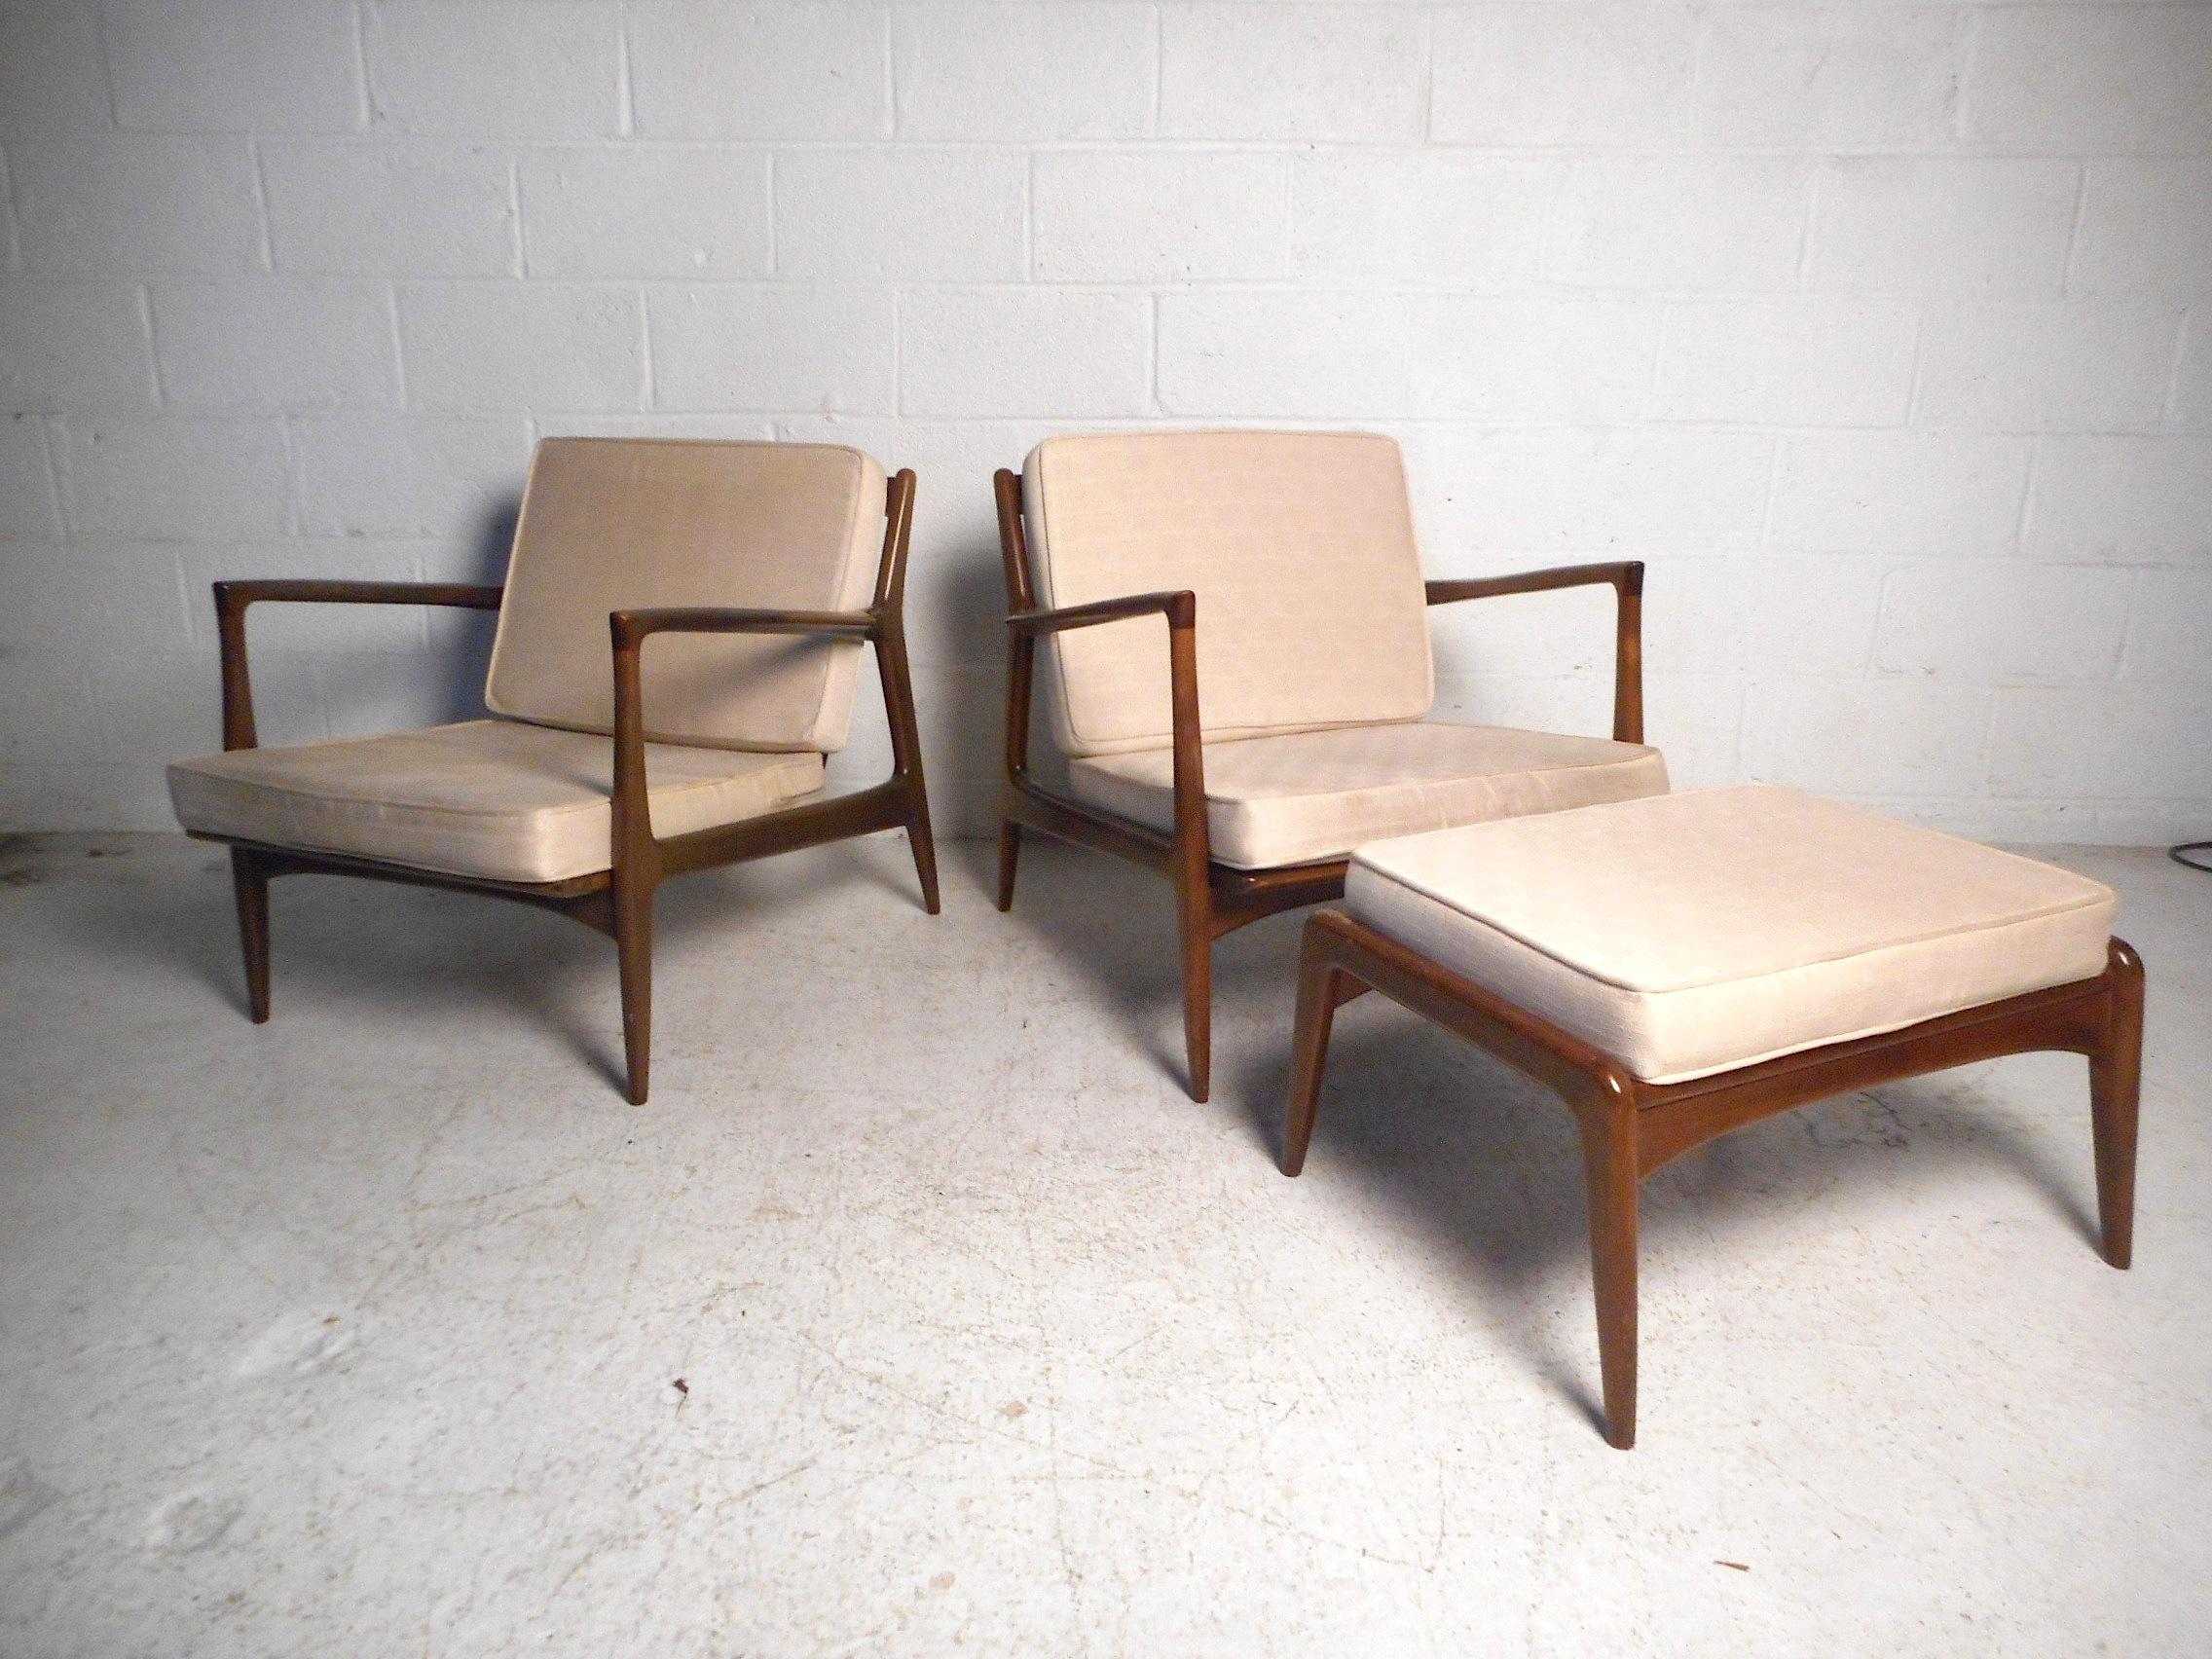 This stylish Danish modern set features a sleek angular design, sculpted armrests, and tapered legs. Deep seats and angled backrests provide style and comfort. Sure to make an impressive addition to any modern interior, circa 1950s, made in Denmark.